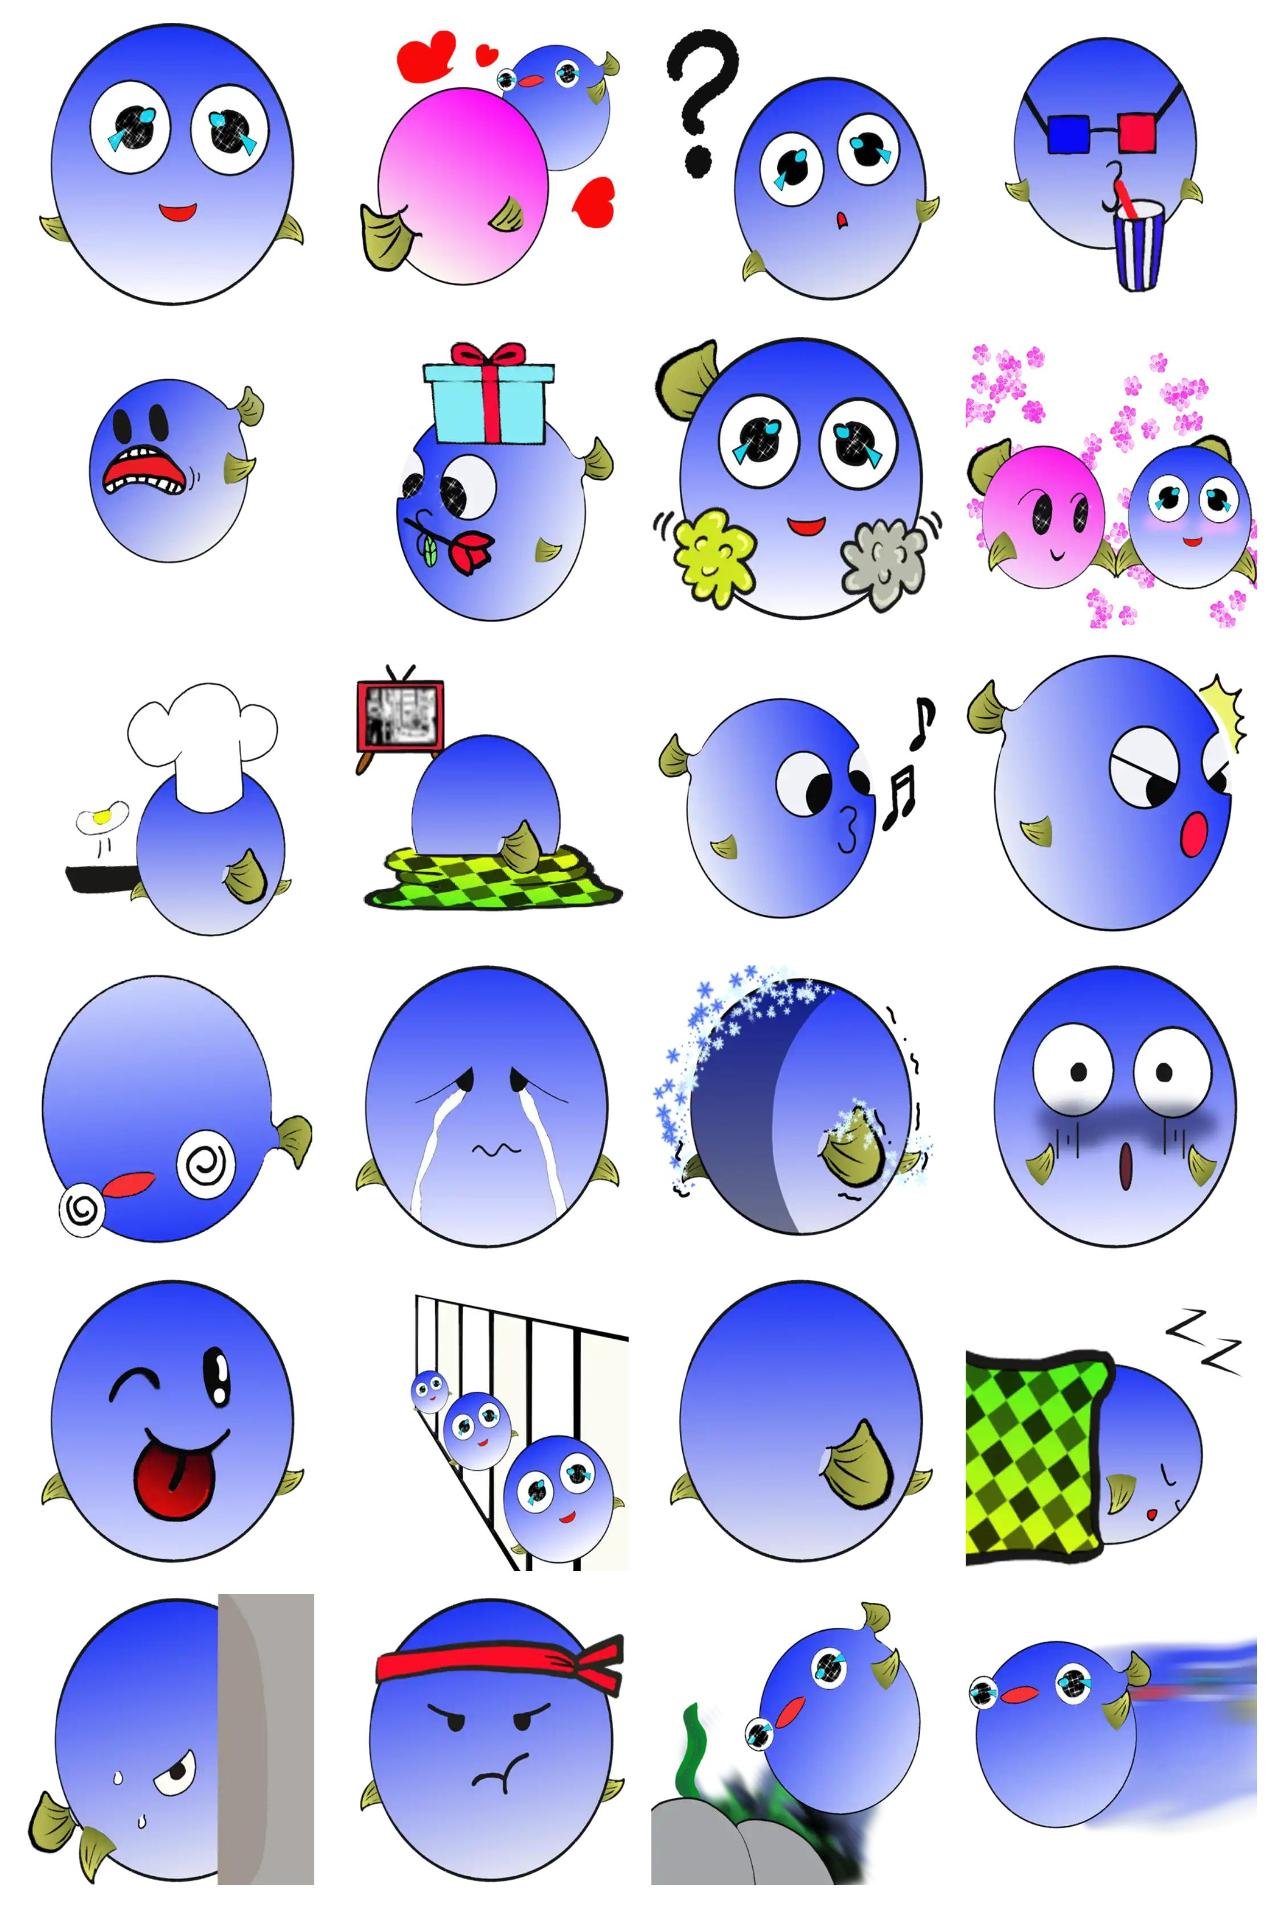 Baby blowfish Animals sticker pack for Whatsapp, Telegram, Signal, and others chatting and message apps